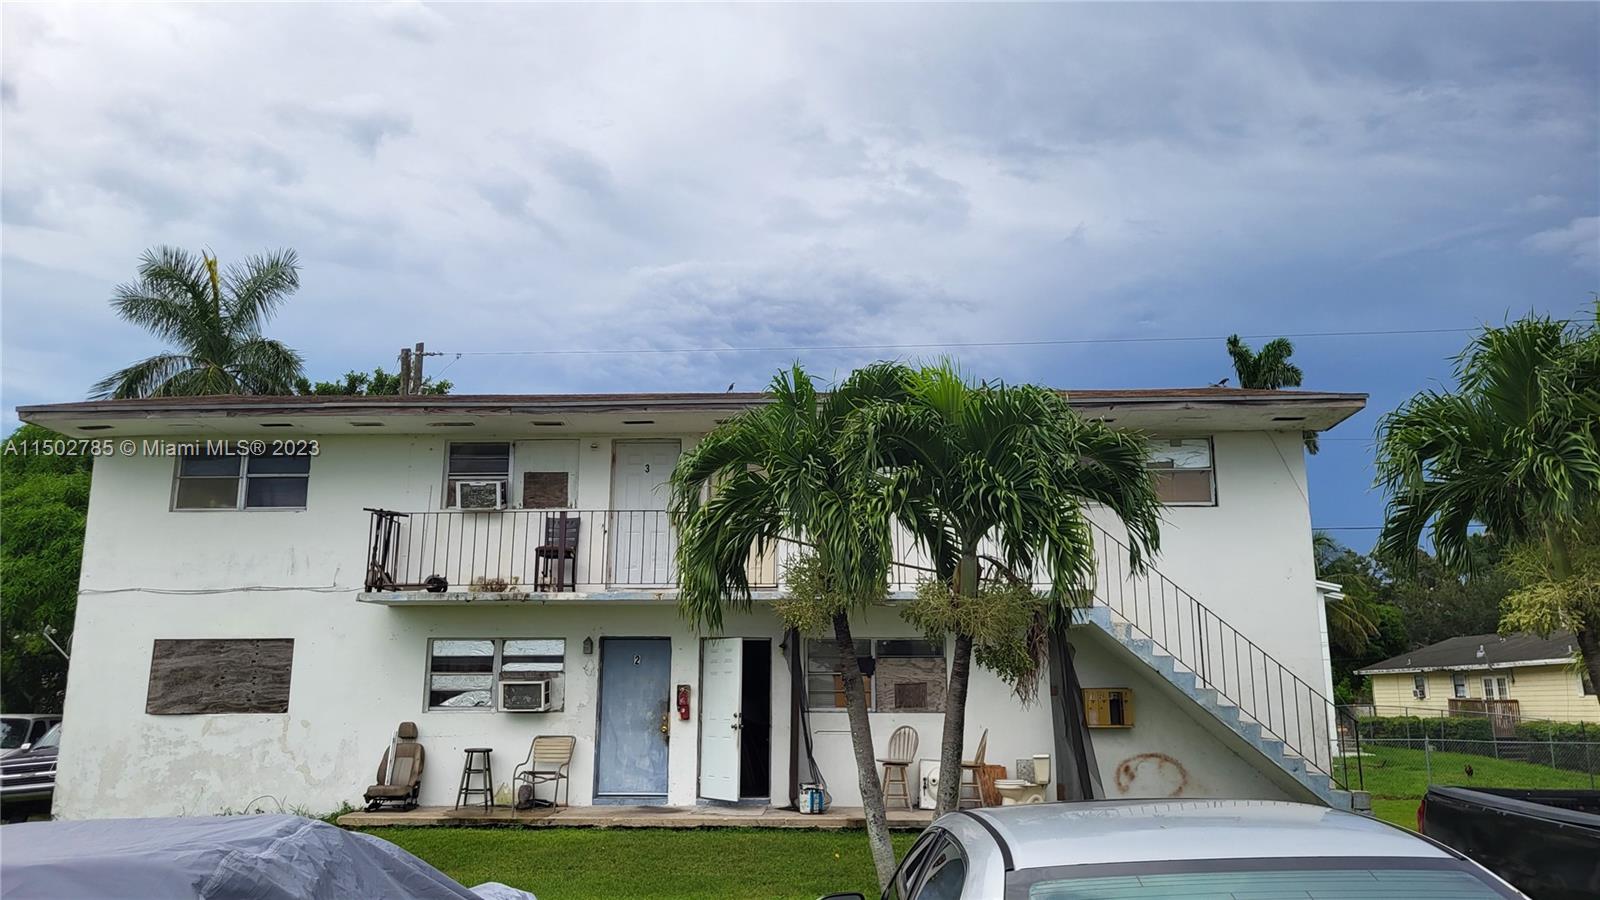 Rental Property at 688 Sw 6th St St, Belle Glade, Palm Beach County, Florida -  - $310,000 MO.